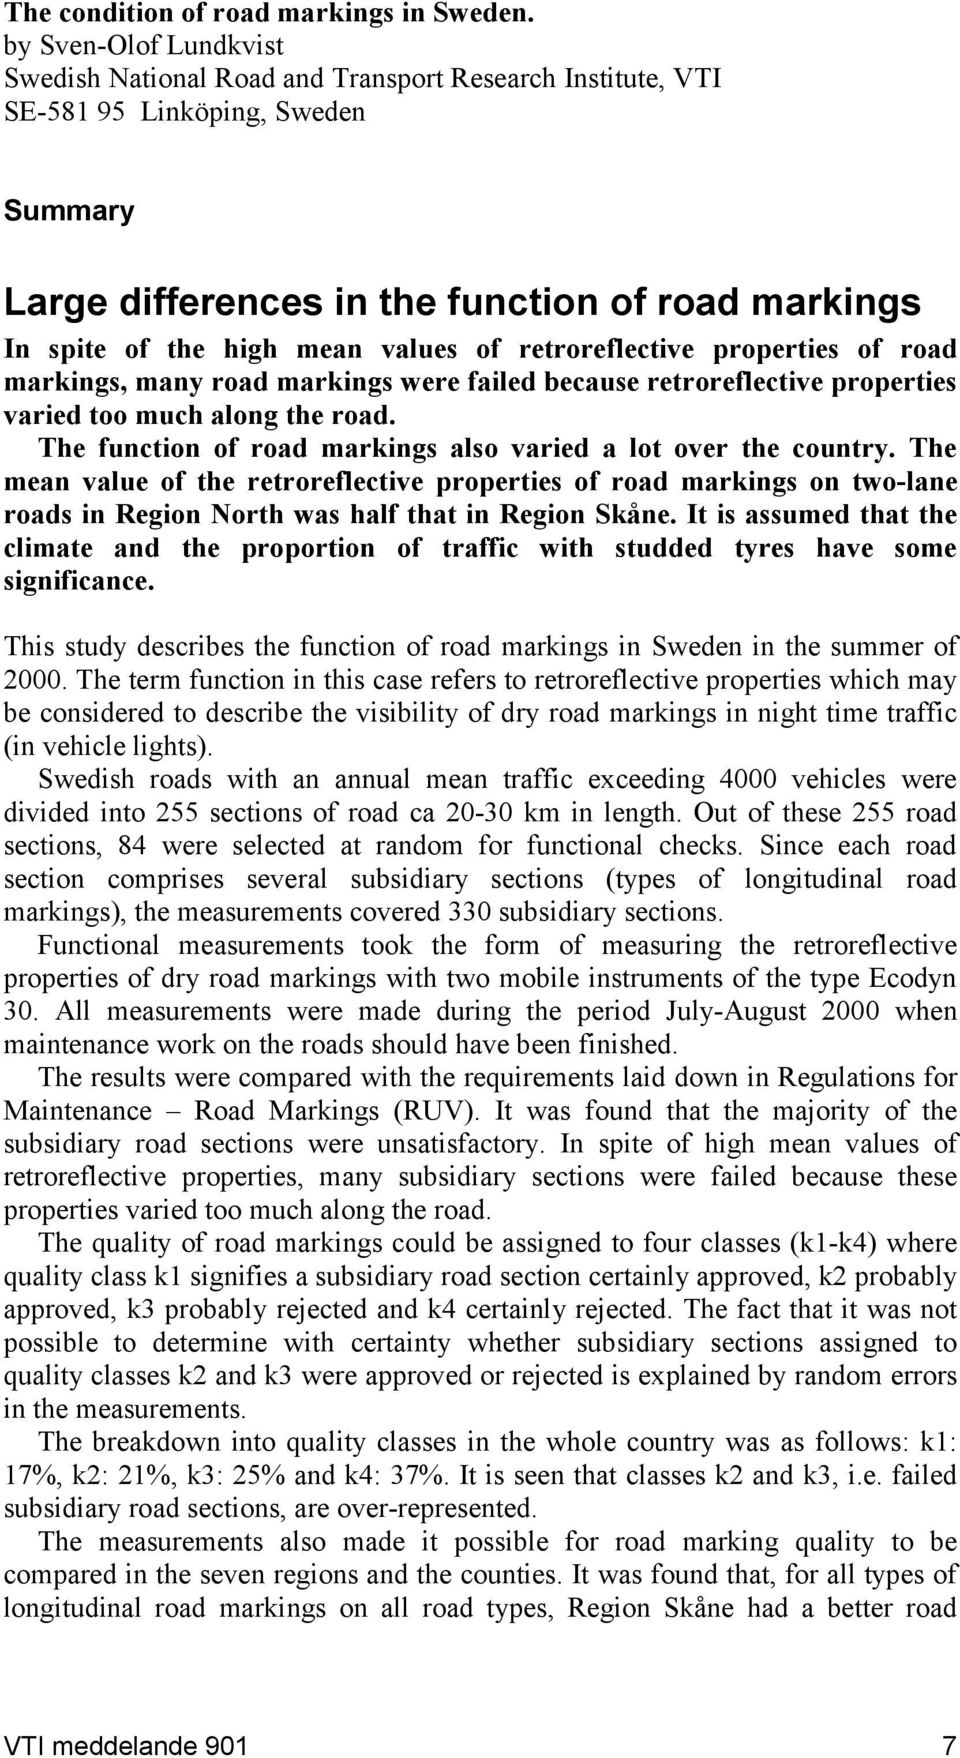 values of retroreflective properties of road markings, many road markings were failed because retroreflective properties varied too much along the road.